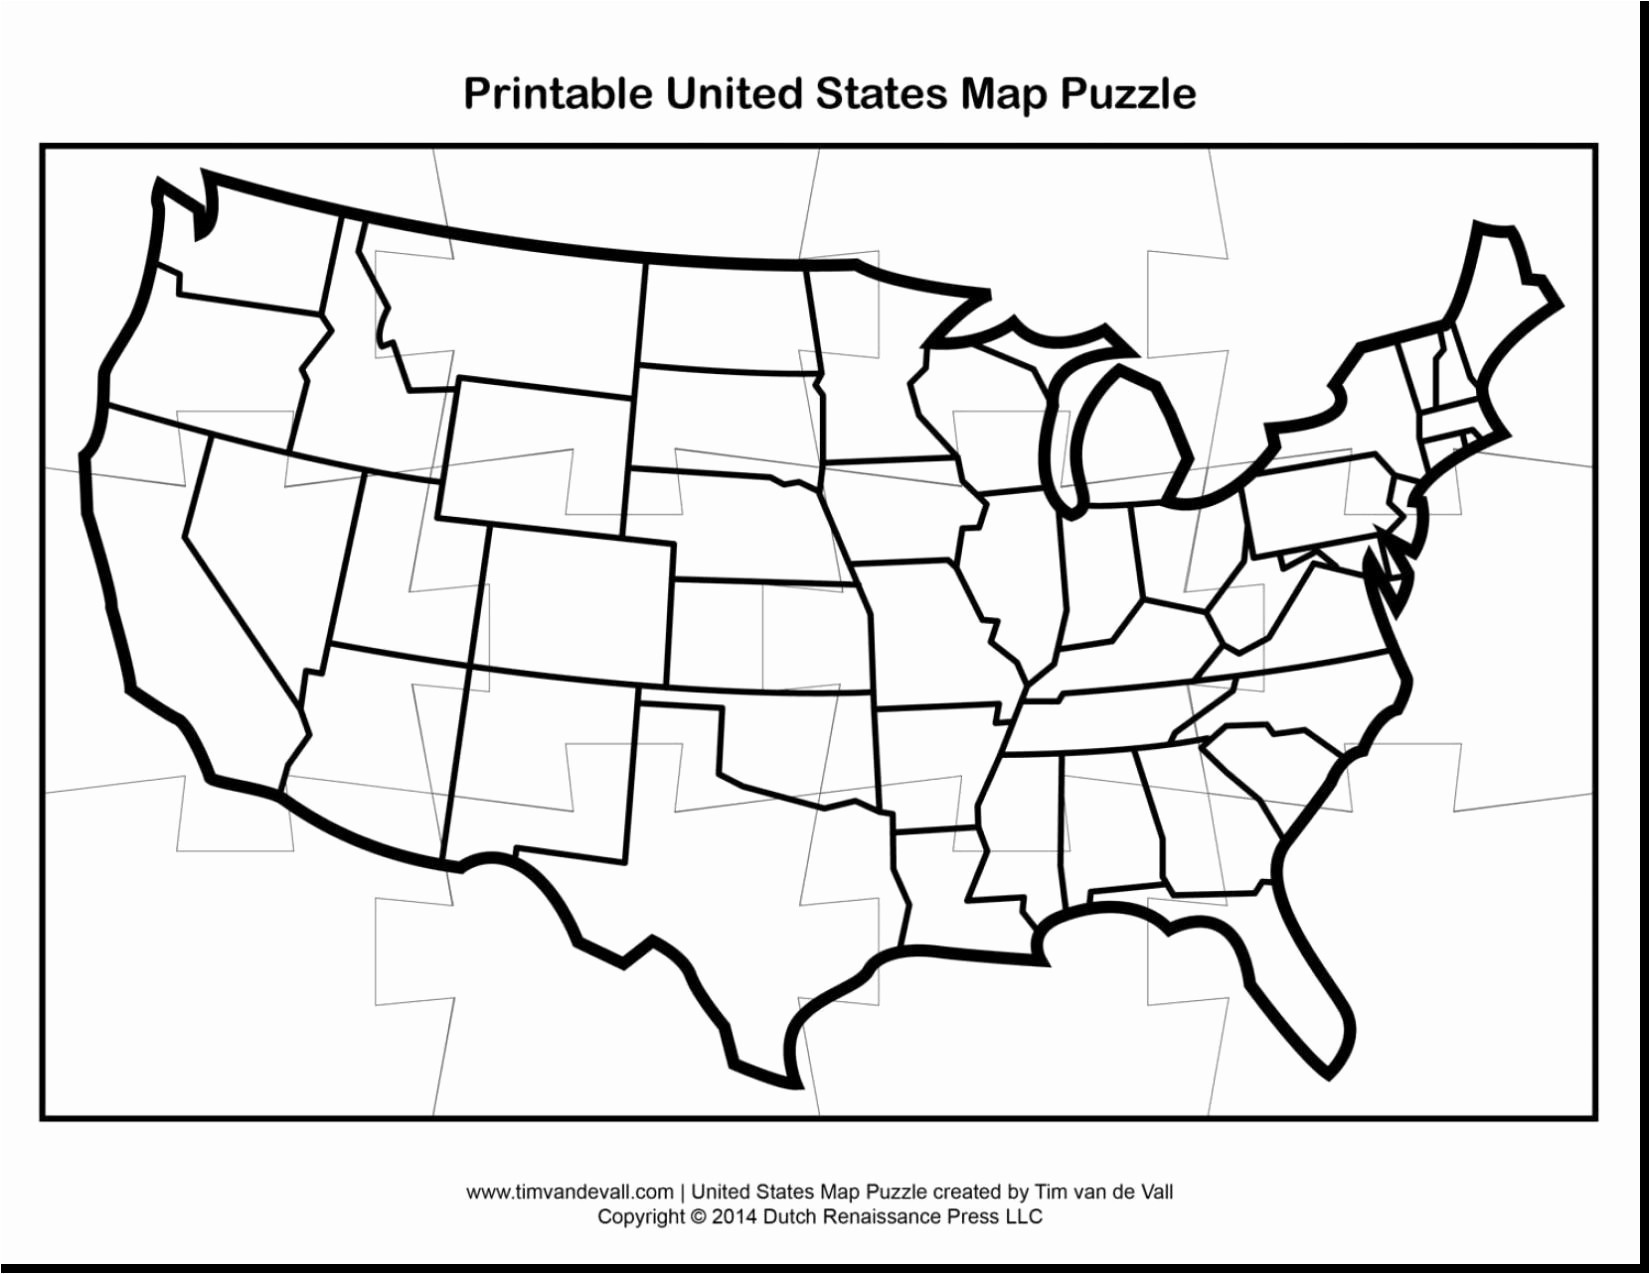 United States Map Puzzle Printable Free Downloads United States Map